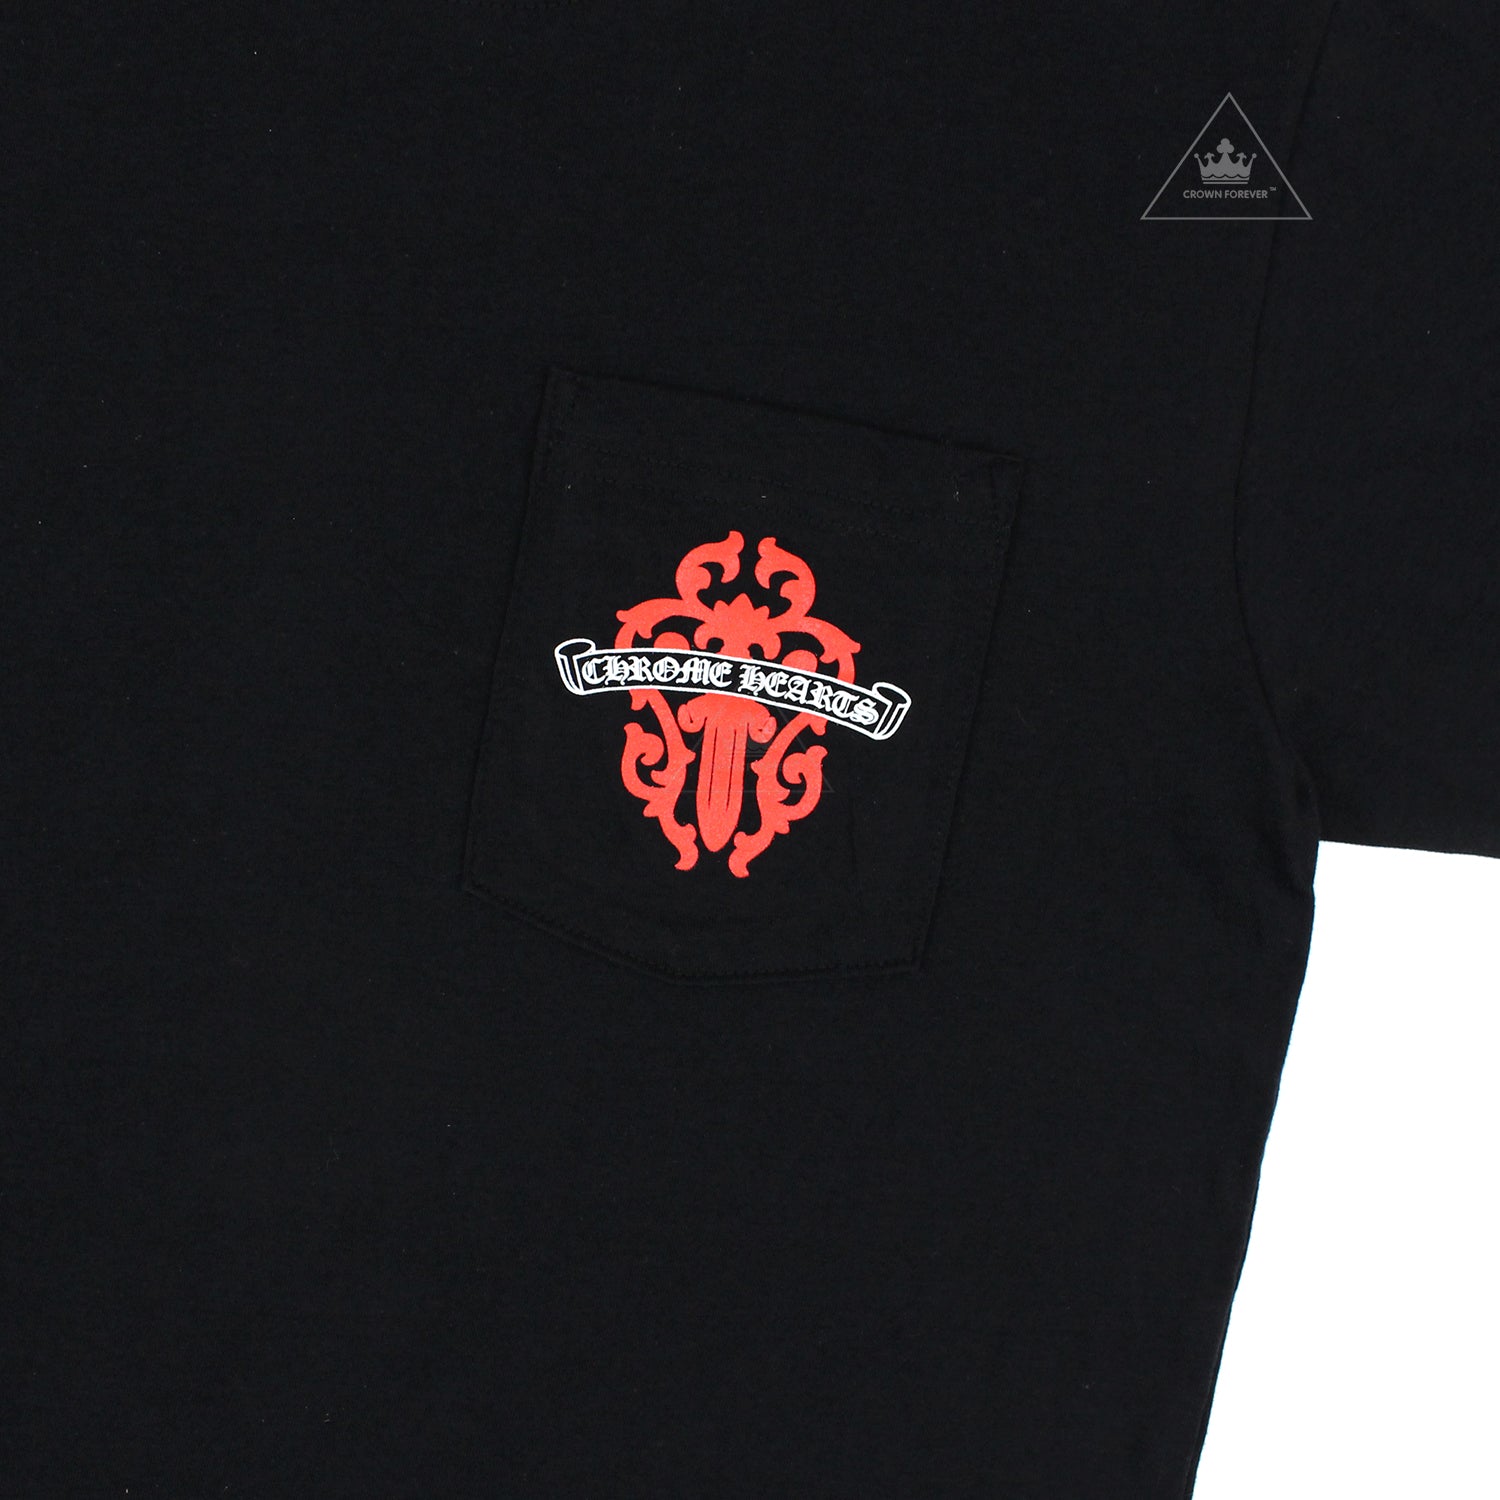 black shirt with red hearts